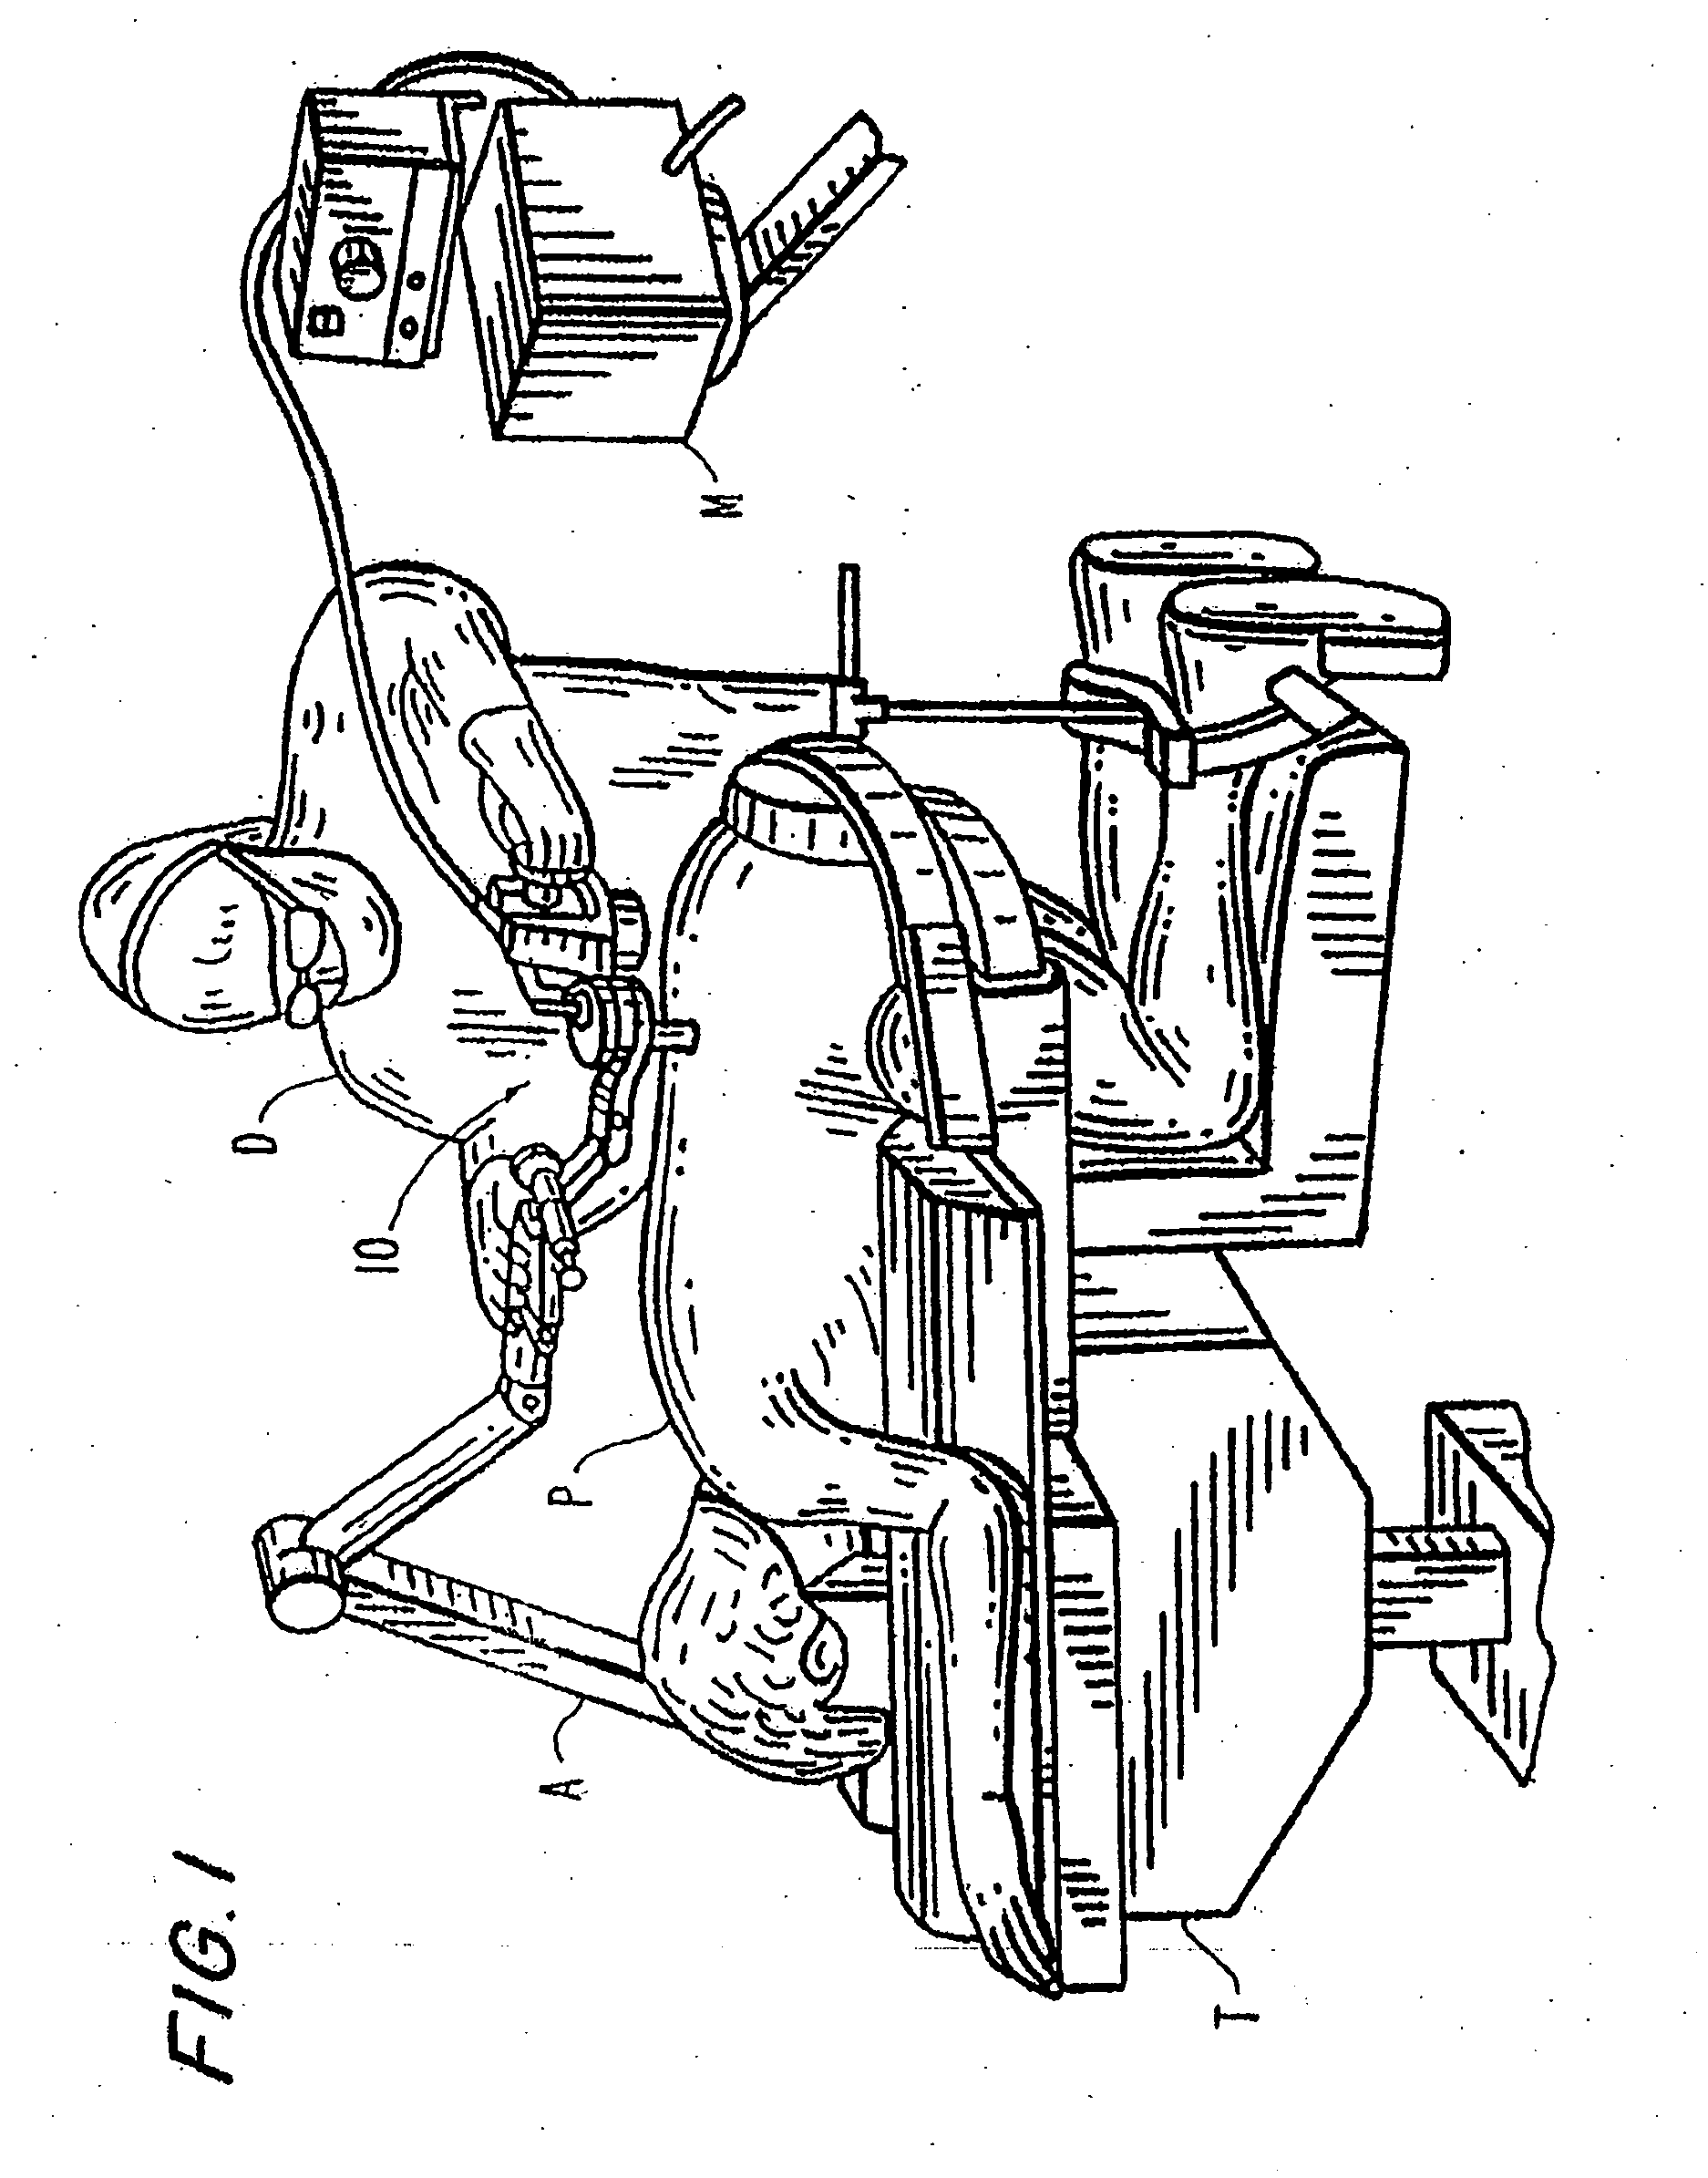 Tool for preparing a surgical site for an access device